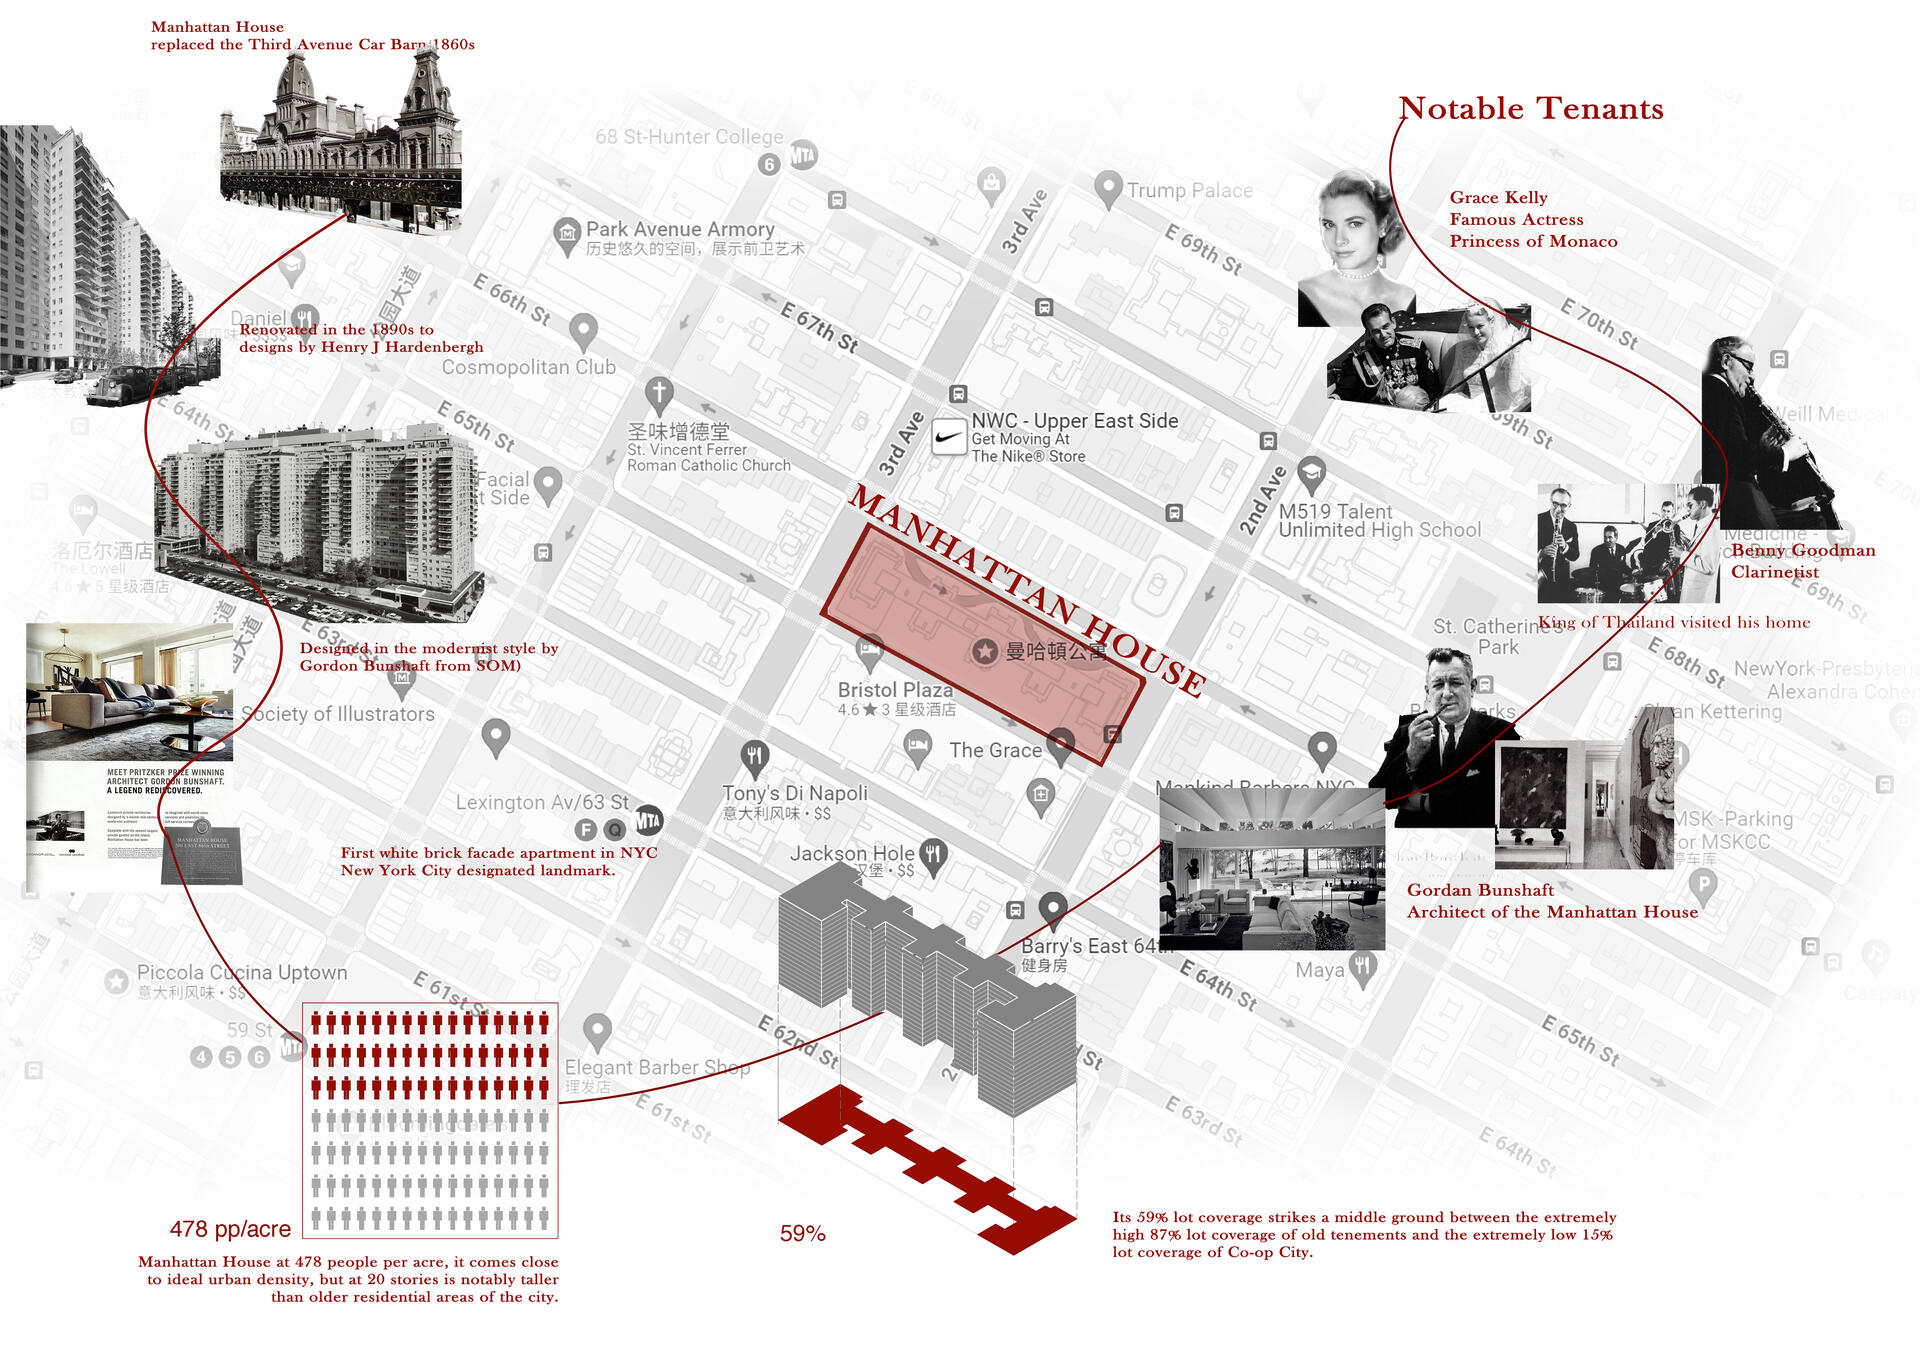  Historical and Demographic Overview of Manhattan House